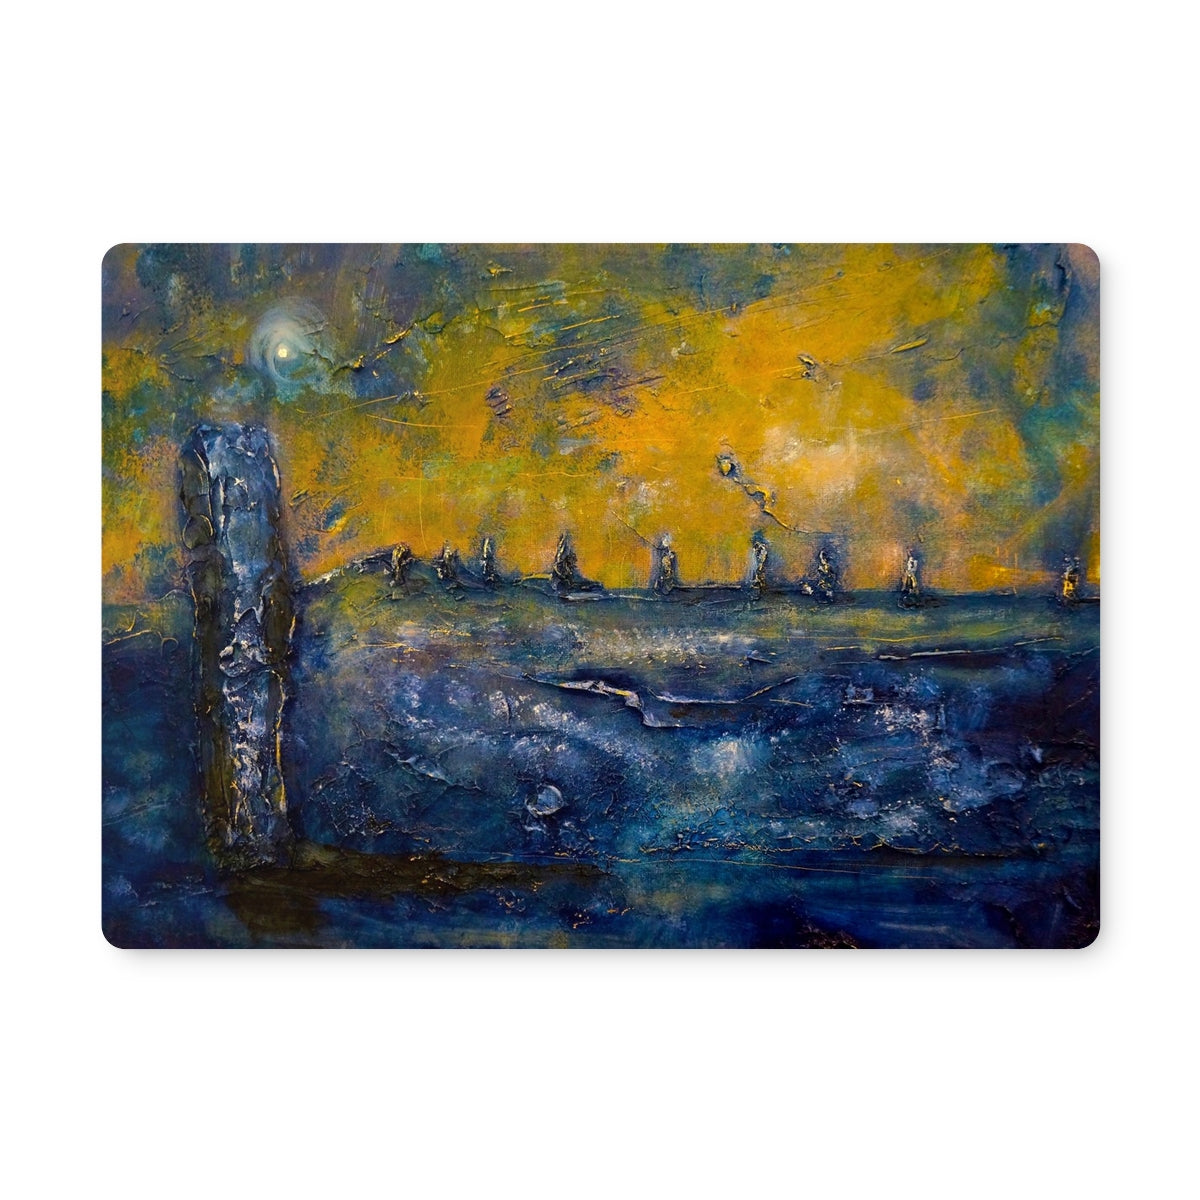 Brodgar Moonlight Orkney Art Gifts Placemat-Placemats-Orkney Art Gallery-6 Placemats-Paintings, Prints, Homeware, Art Gifts From Scotland By Scottish Artist Kevin Hunter